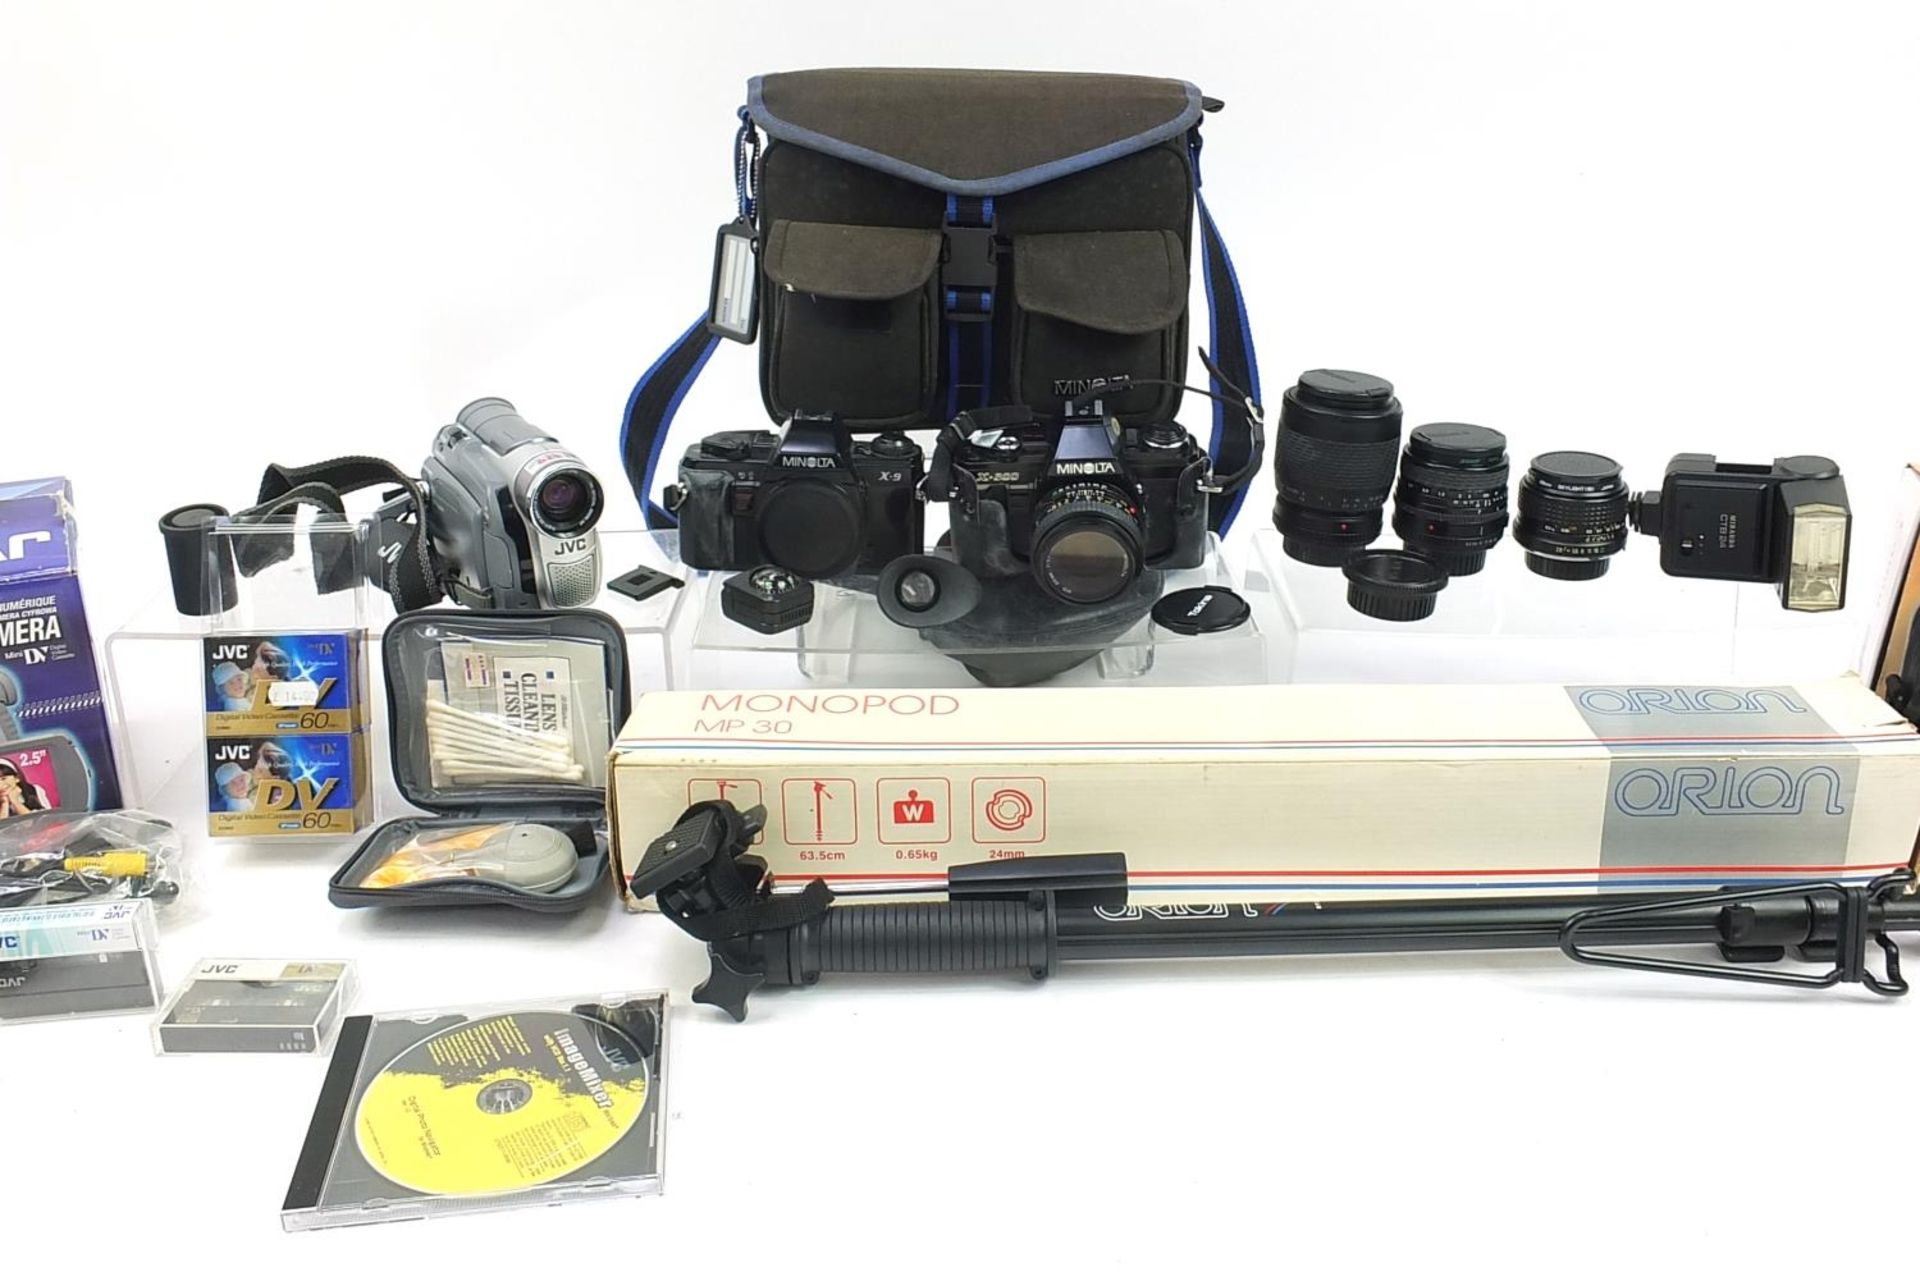 Vintage and later cameras, lenses and accessories including Minolta X-9, Minolta X-300 and Canon - Image 3 of 4